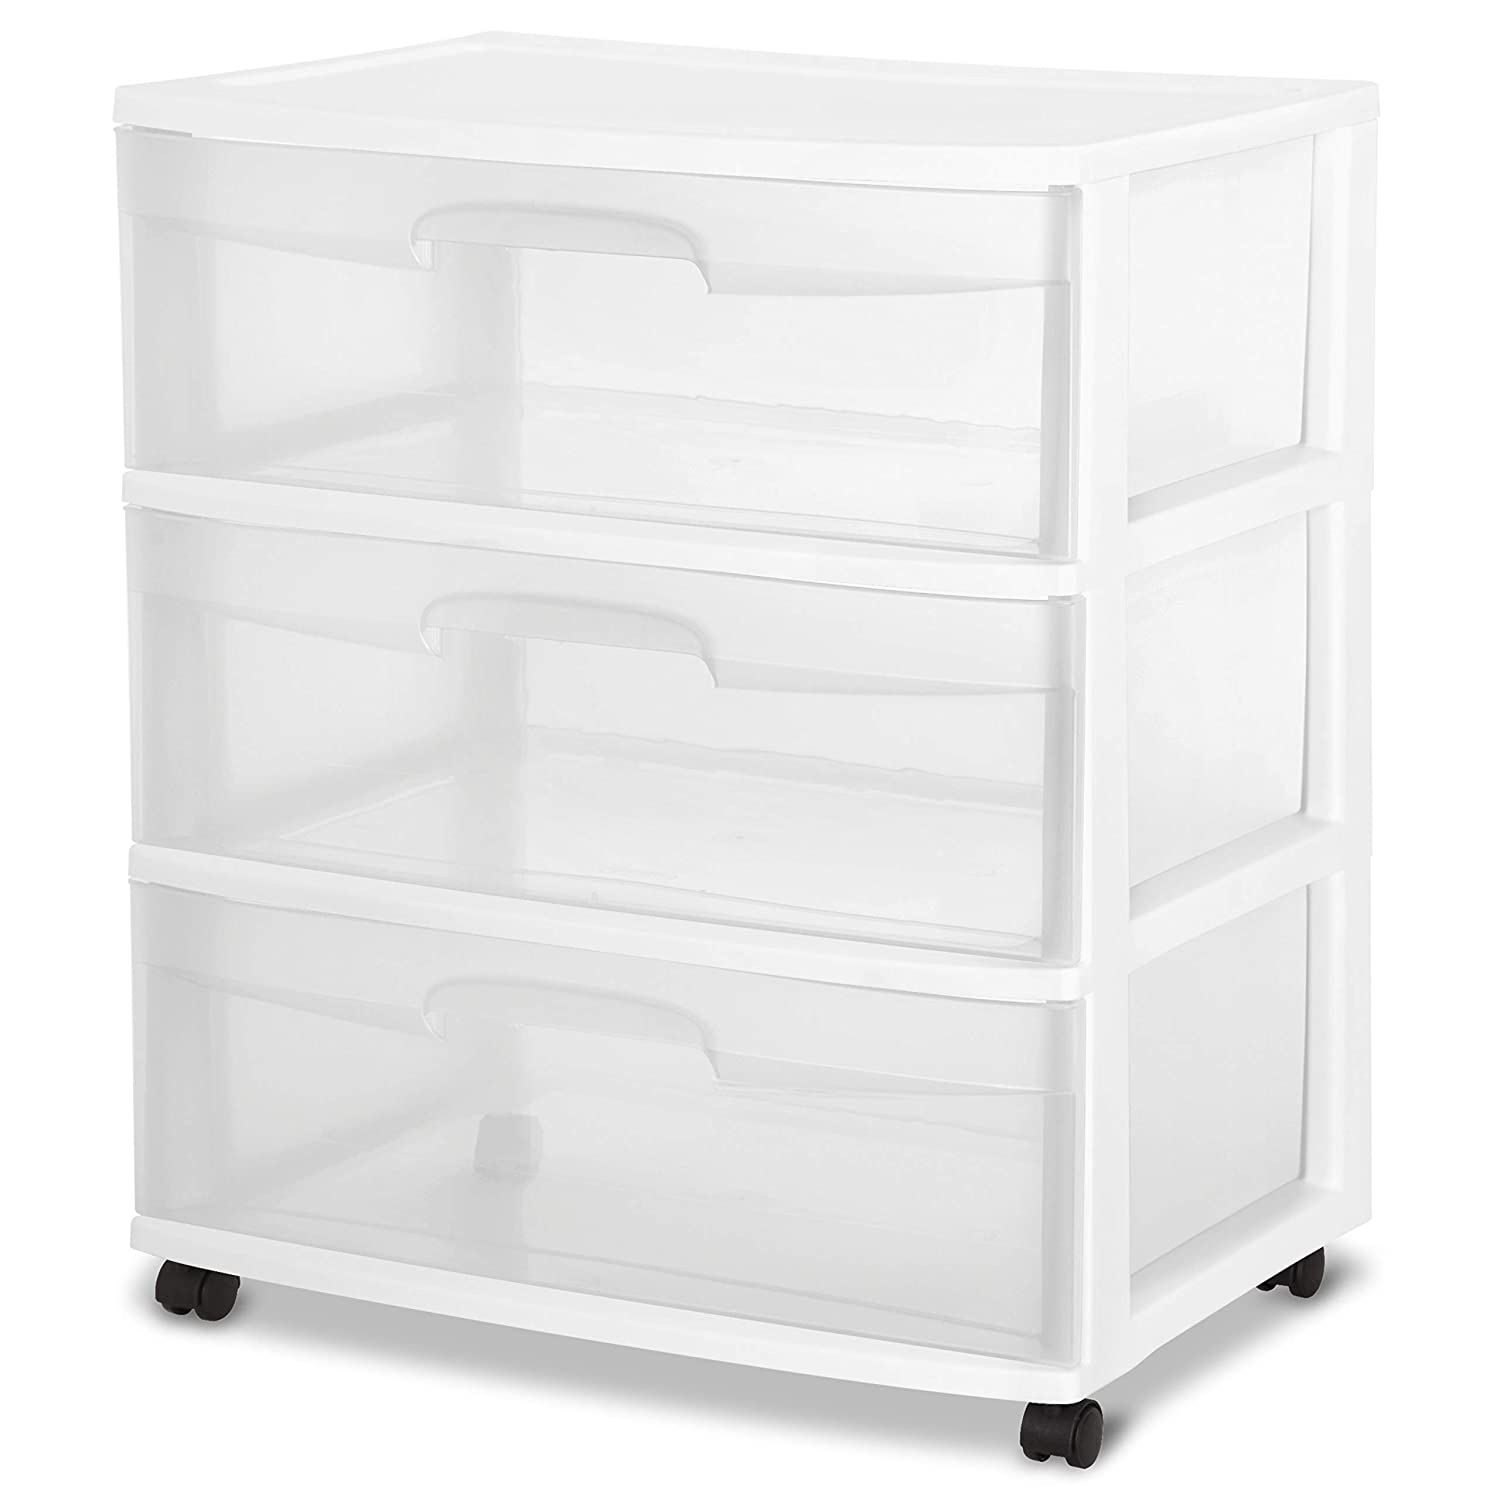 Sterilite 29308001 Drawer Cart, 15.25 in Overall Length, 21.88 in Overall Width, 24 in Overall Height, Black